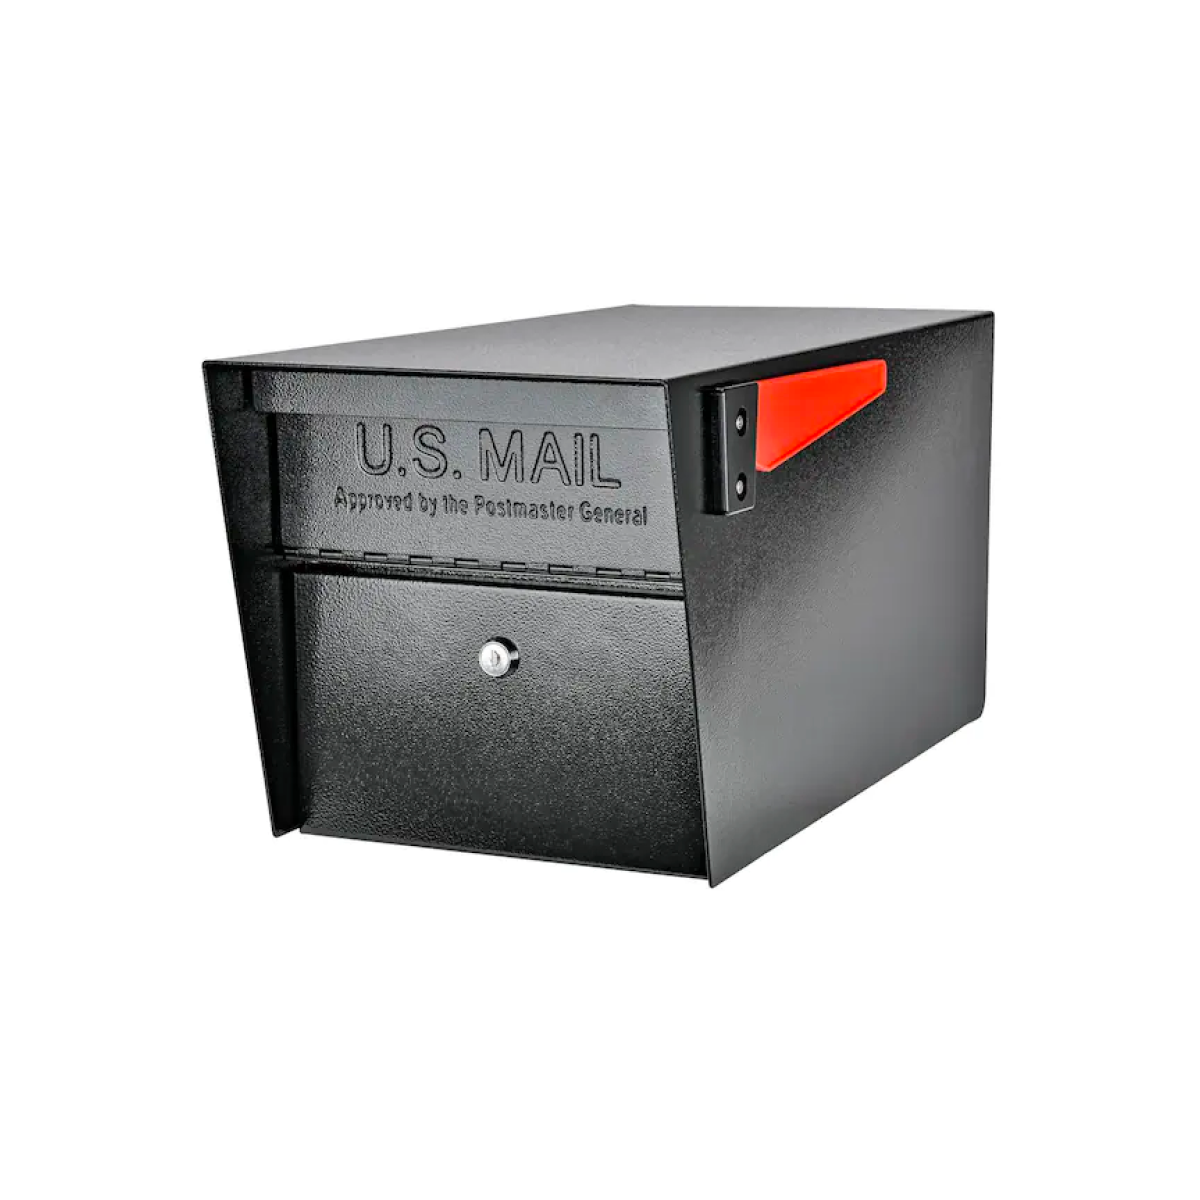 Mail Manager Pro Post Mount Locking Mailbox Product Image